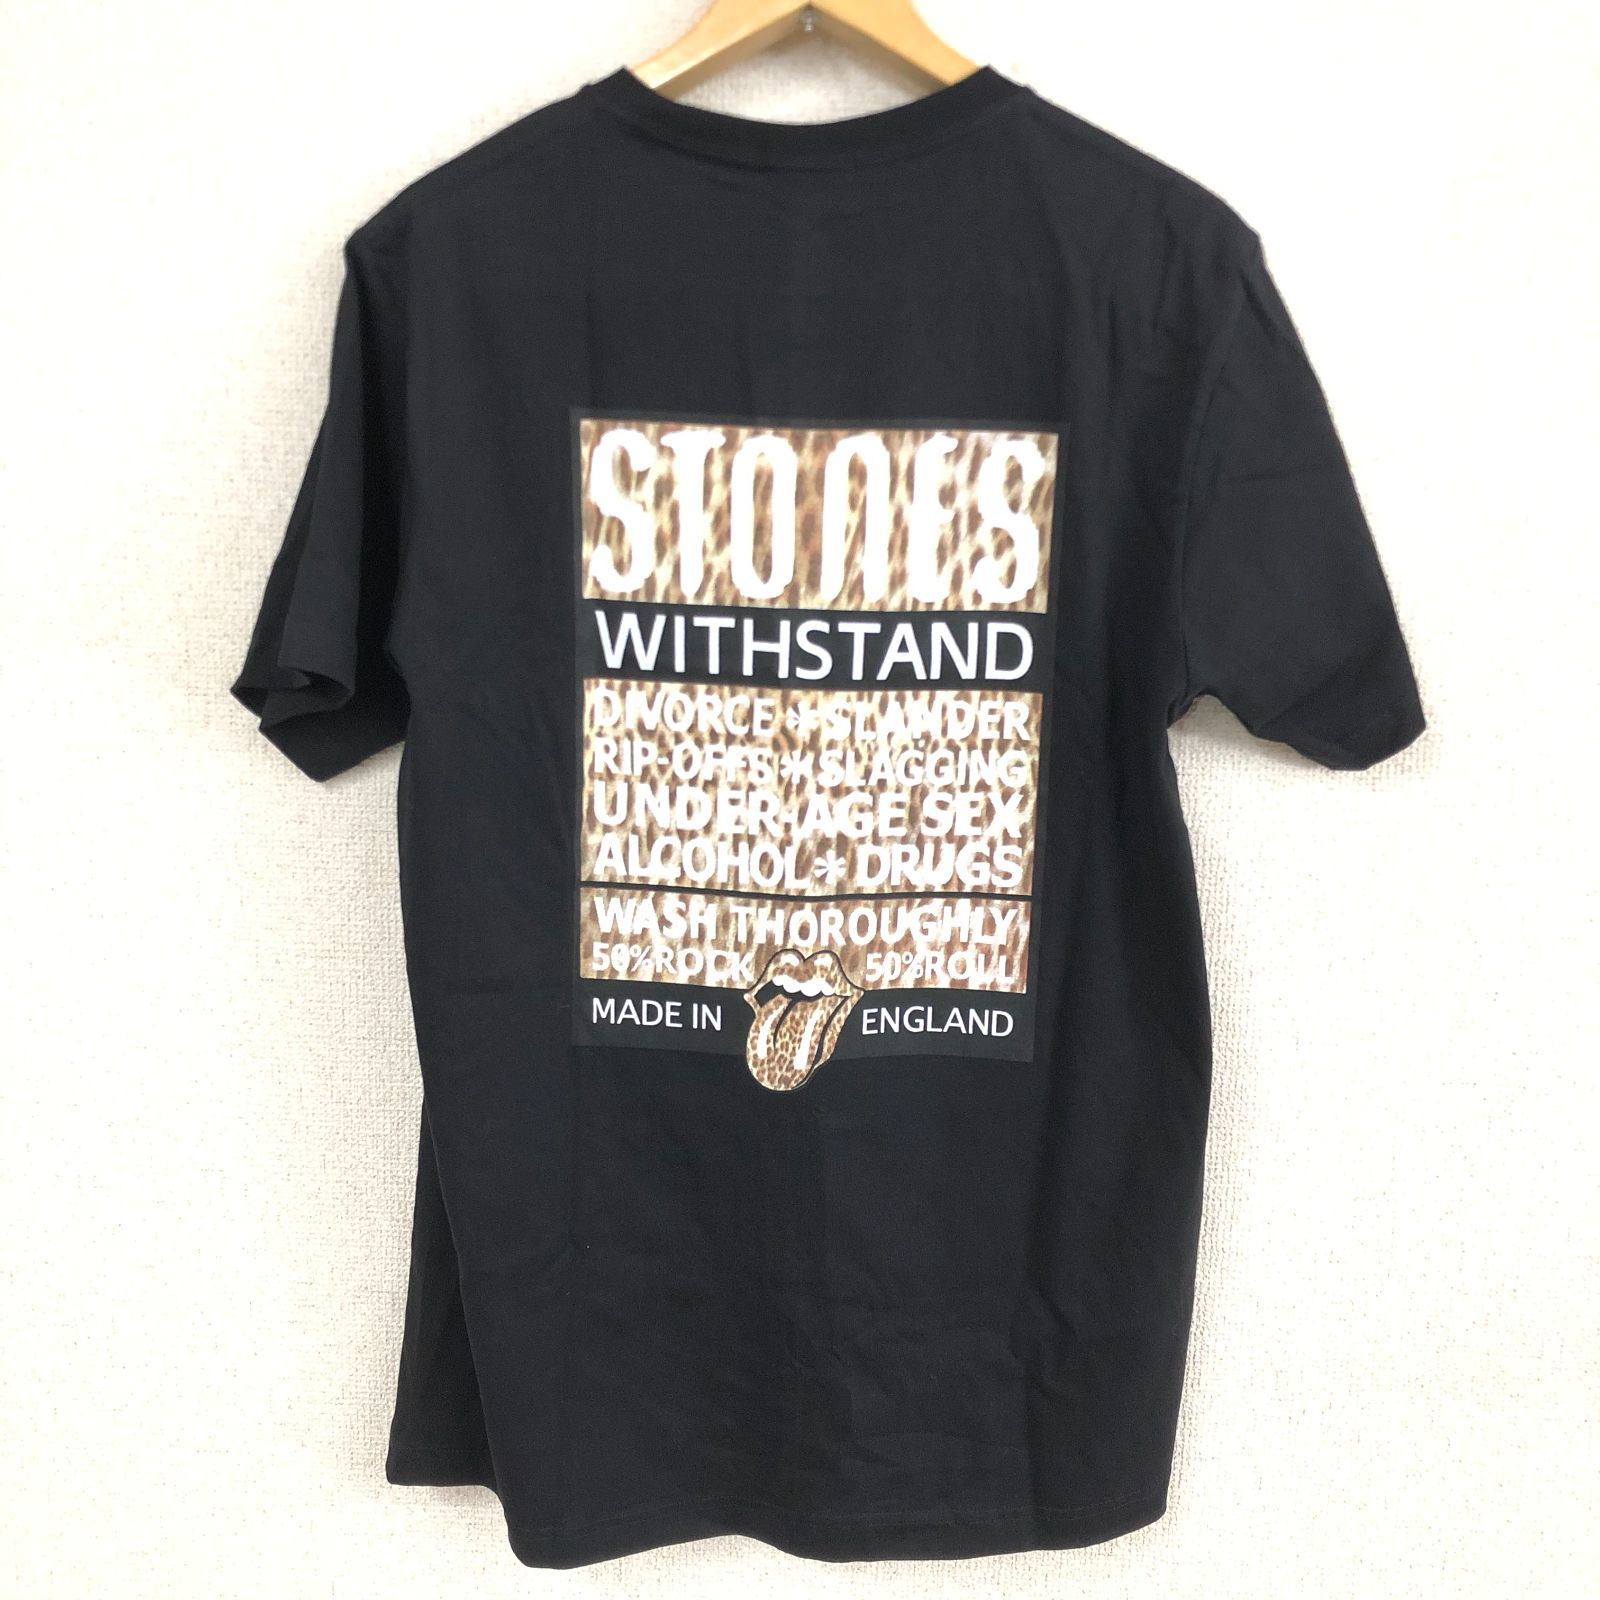 wall of fame バンドTシャツ The Rolling Stones ザローリング